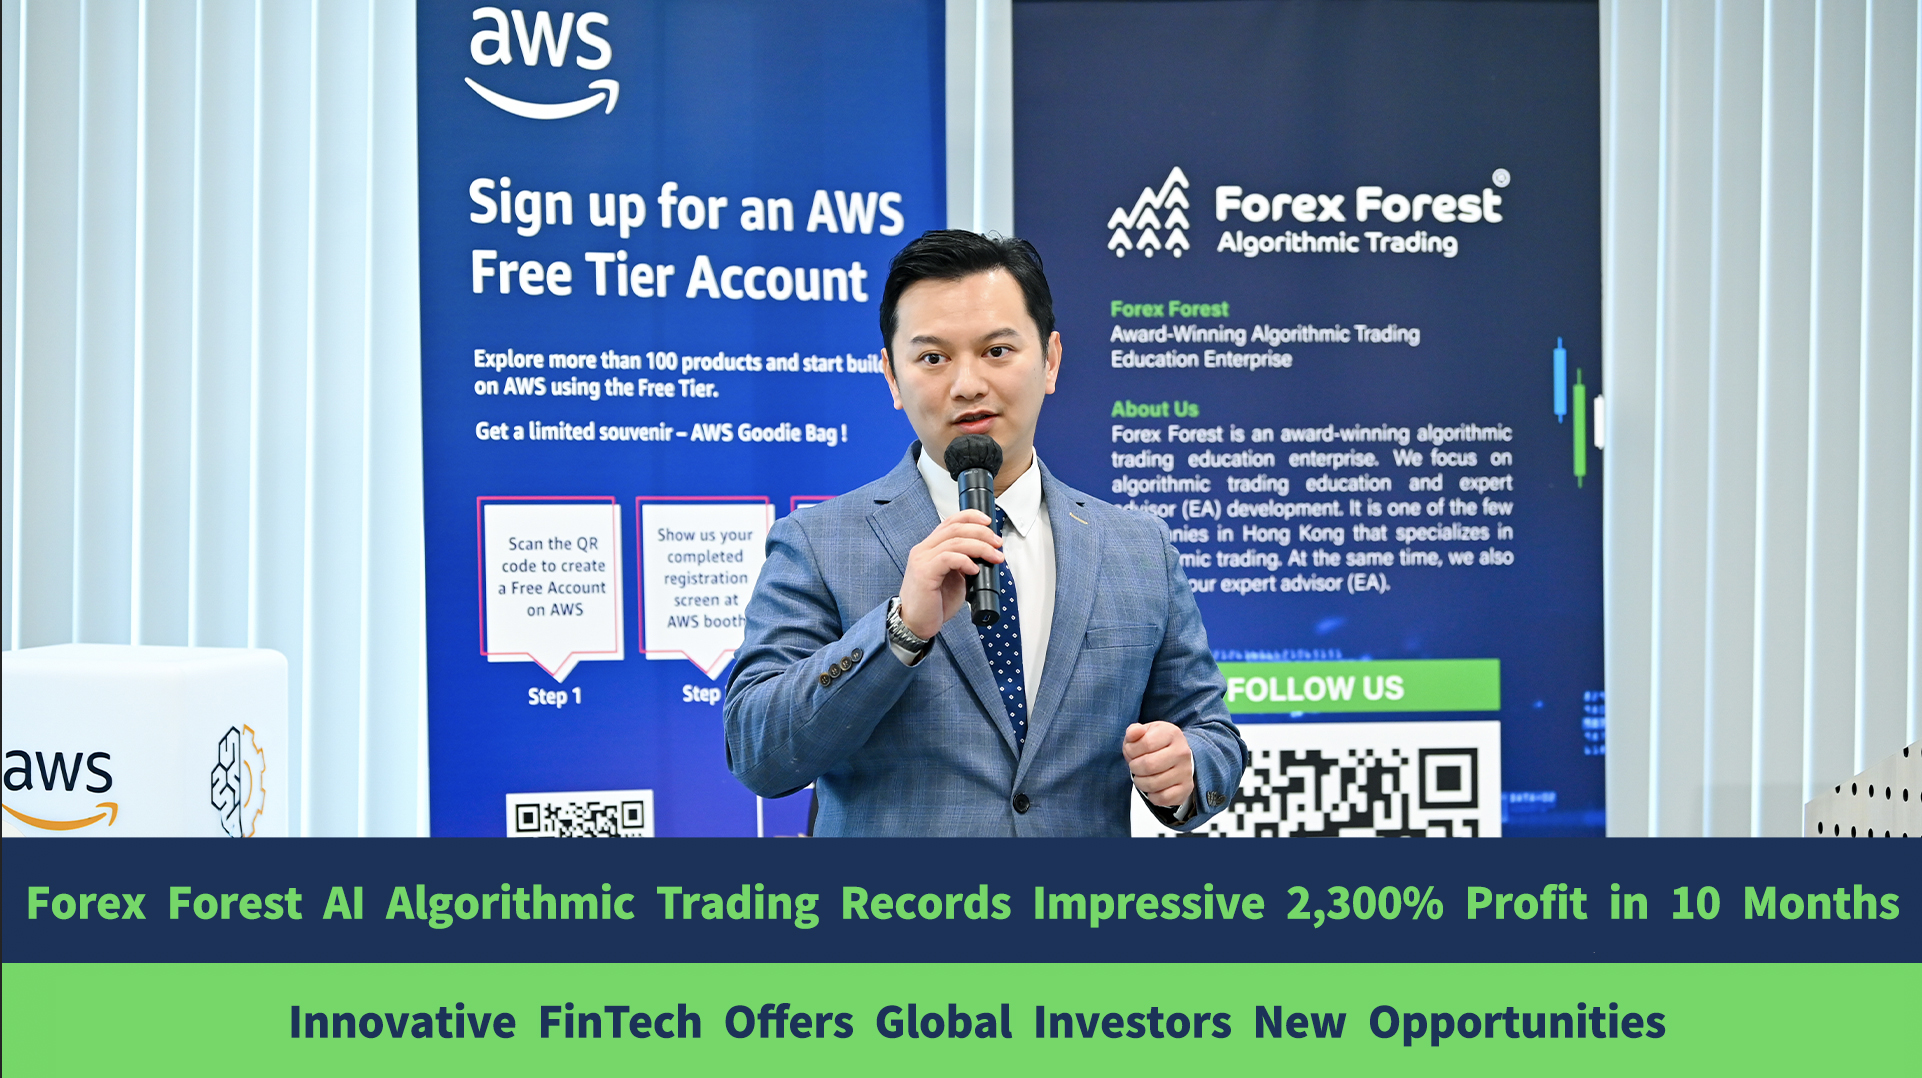 Forex Forest Algorithmic Trading Reports Impressive 2,300% Profit in 10 Months | Taiwan News